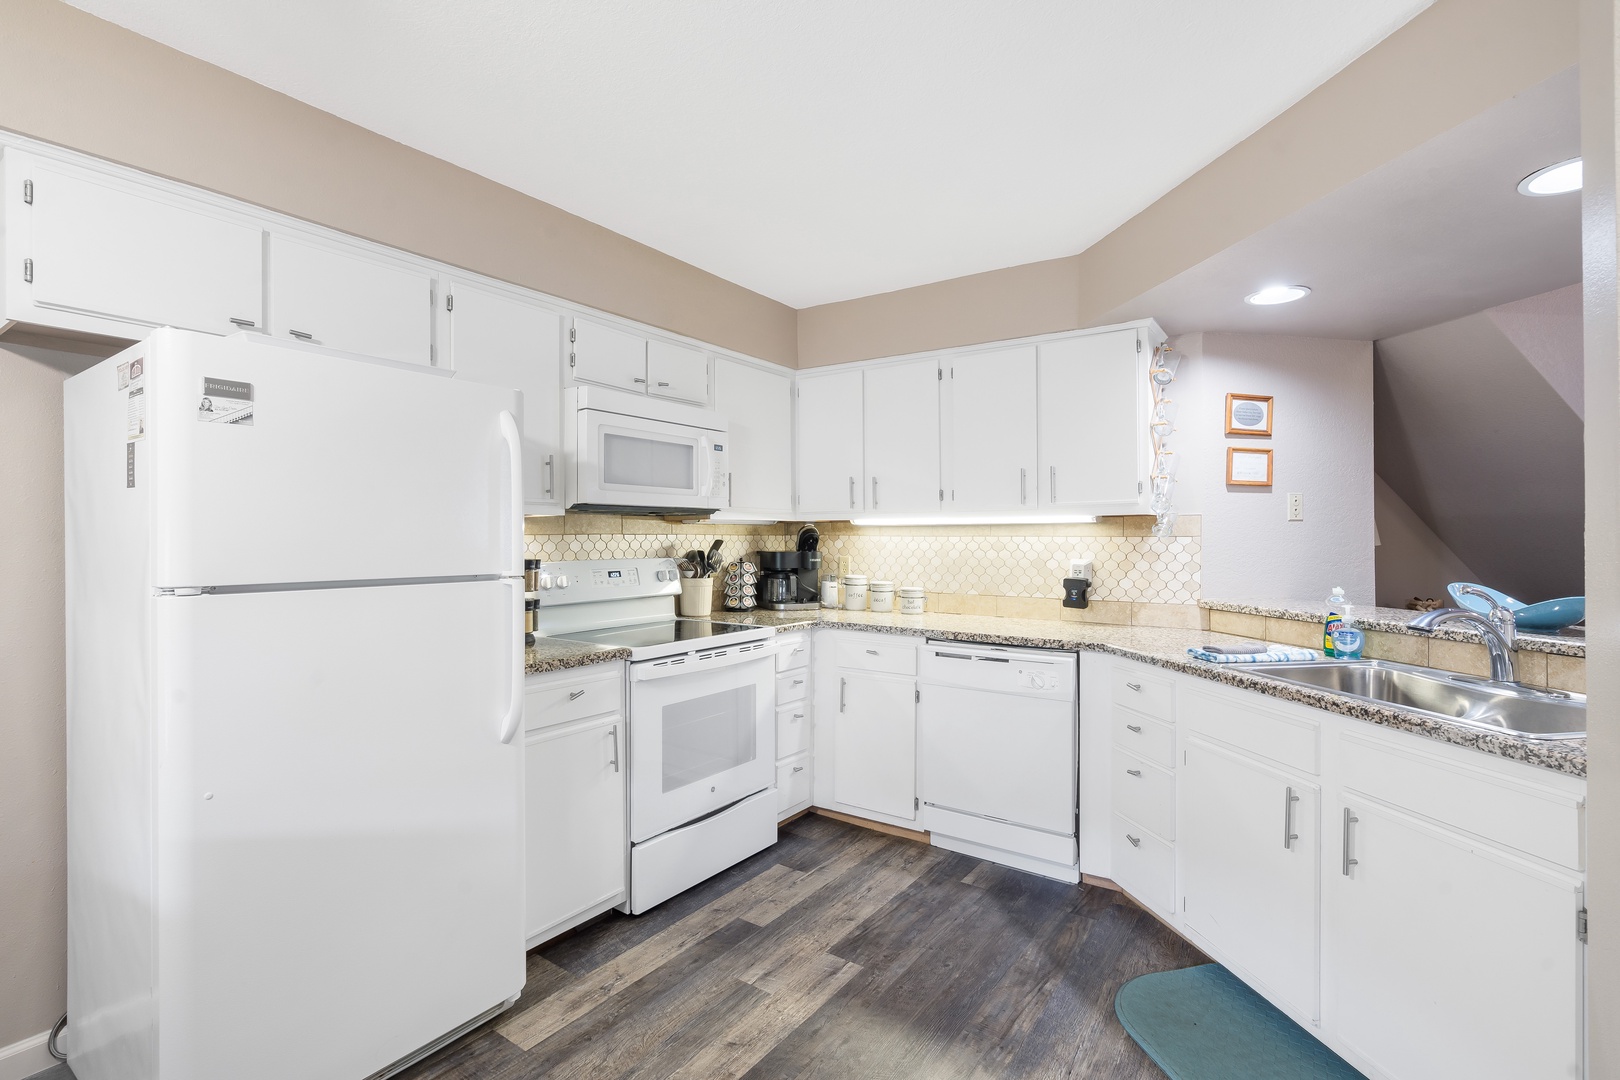 Fully equipped kitchen with Keurig coffee maker, toaster and more